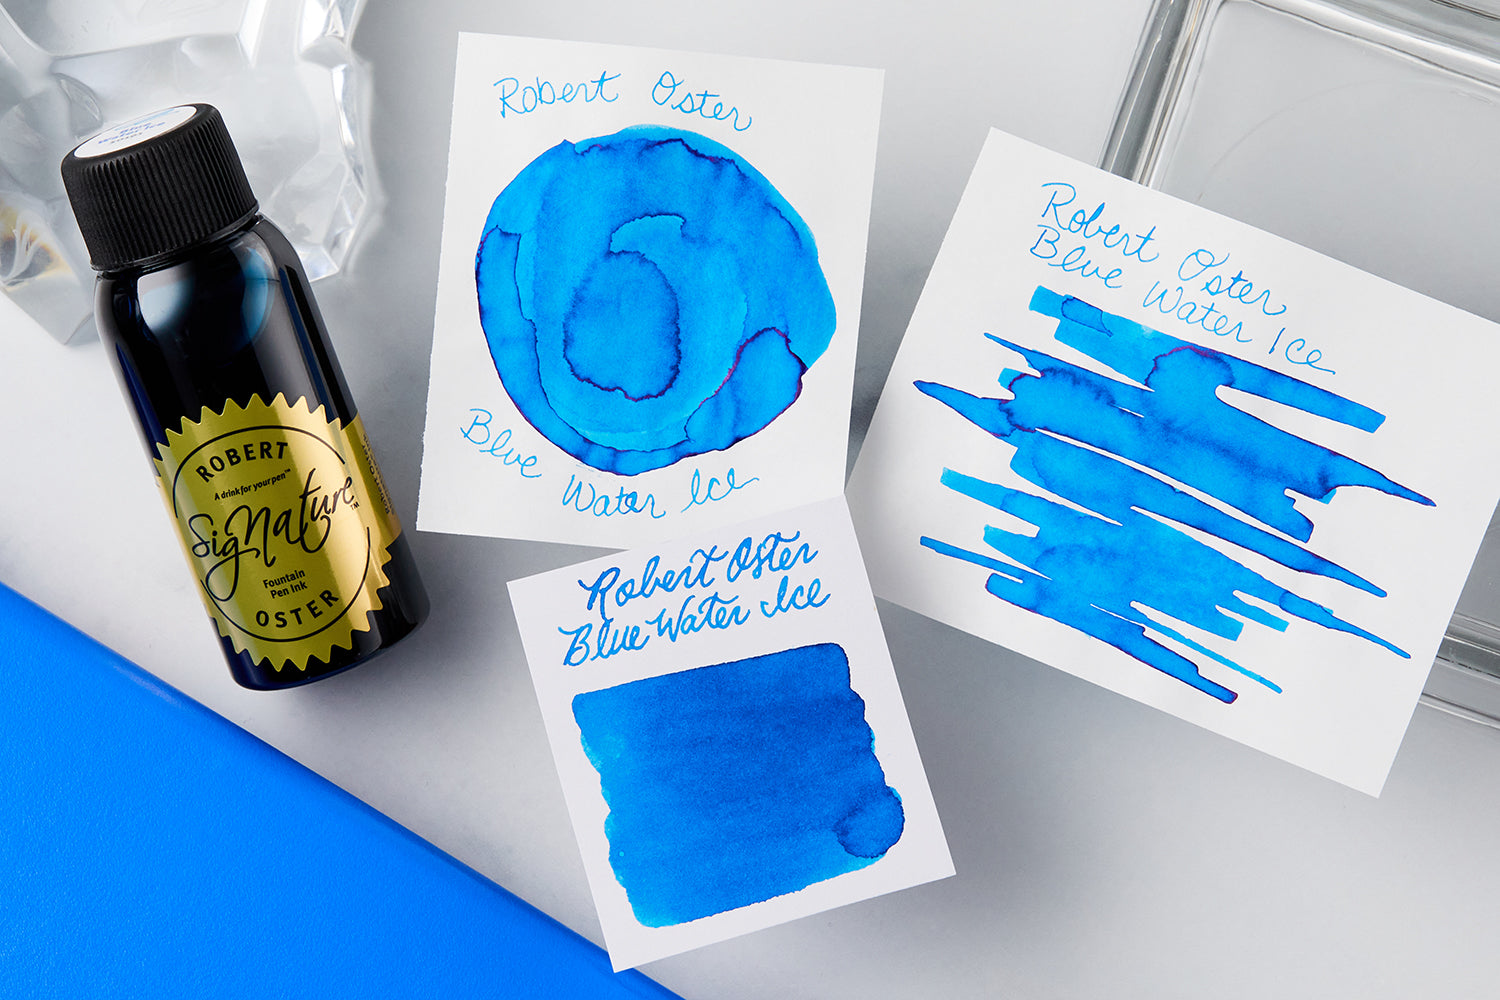 Robert Oster Blue Water Ice Fountain Pen Ink bottle, swab, swatch and additional swatch on white background